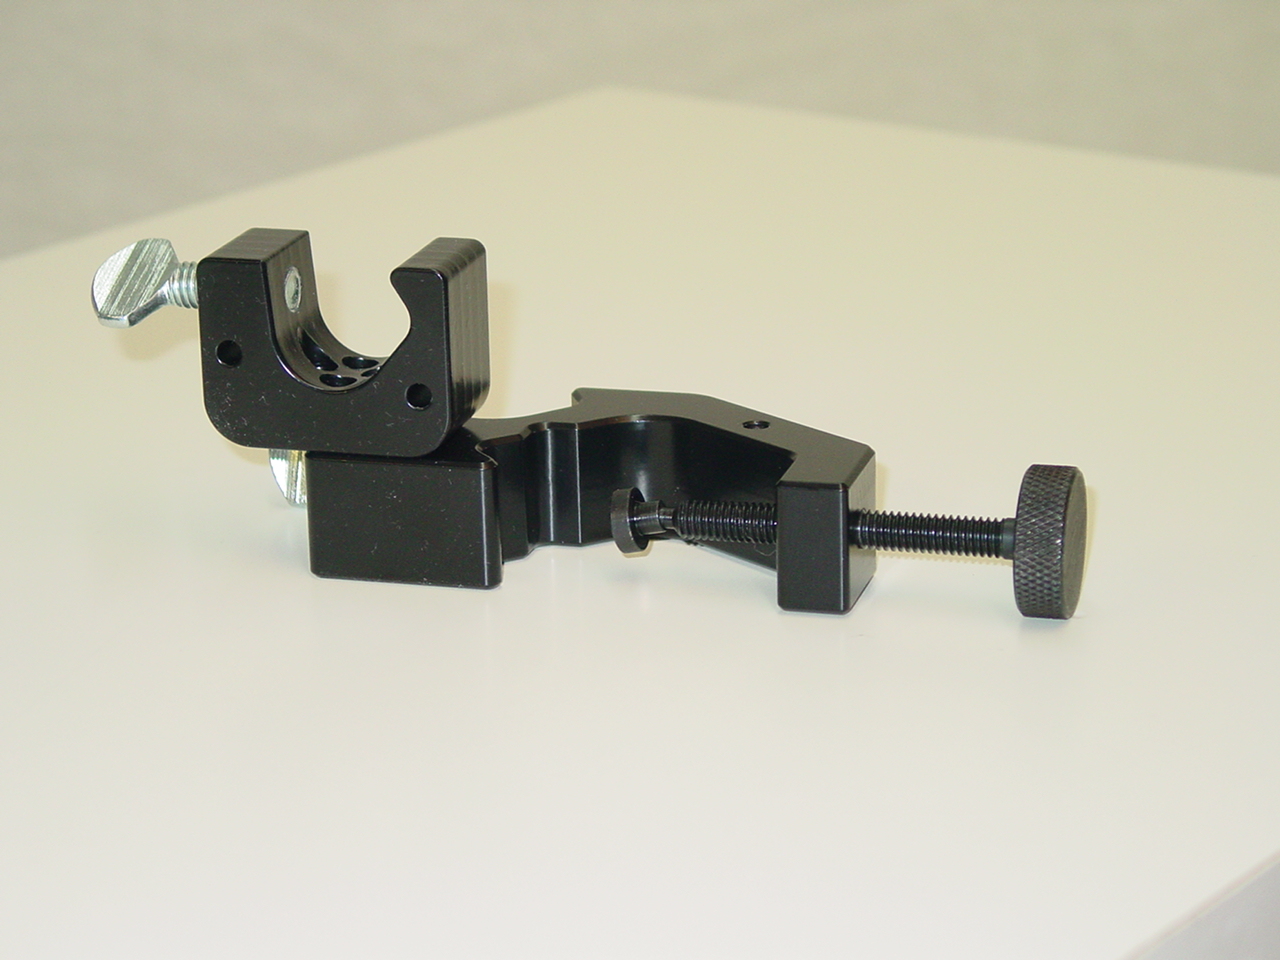 The MtP Wheelchair Clamp Attachment Holder